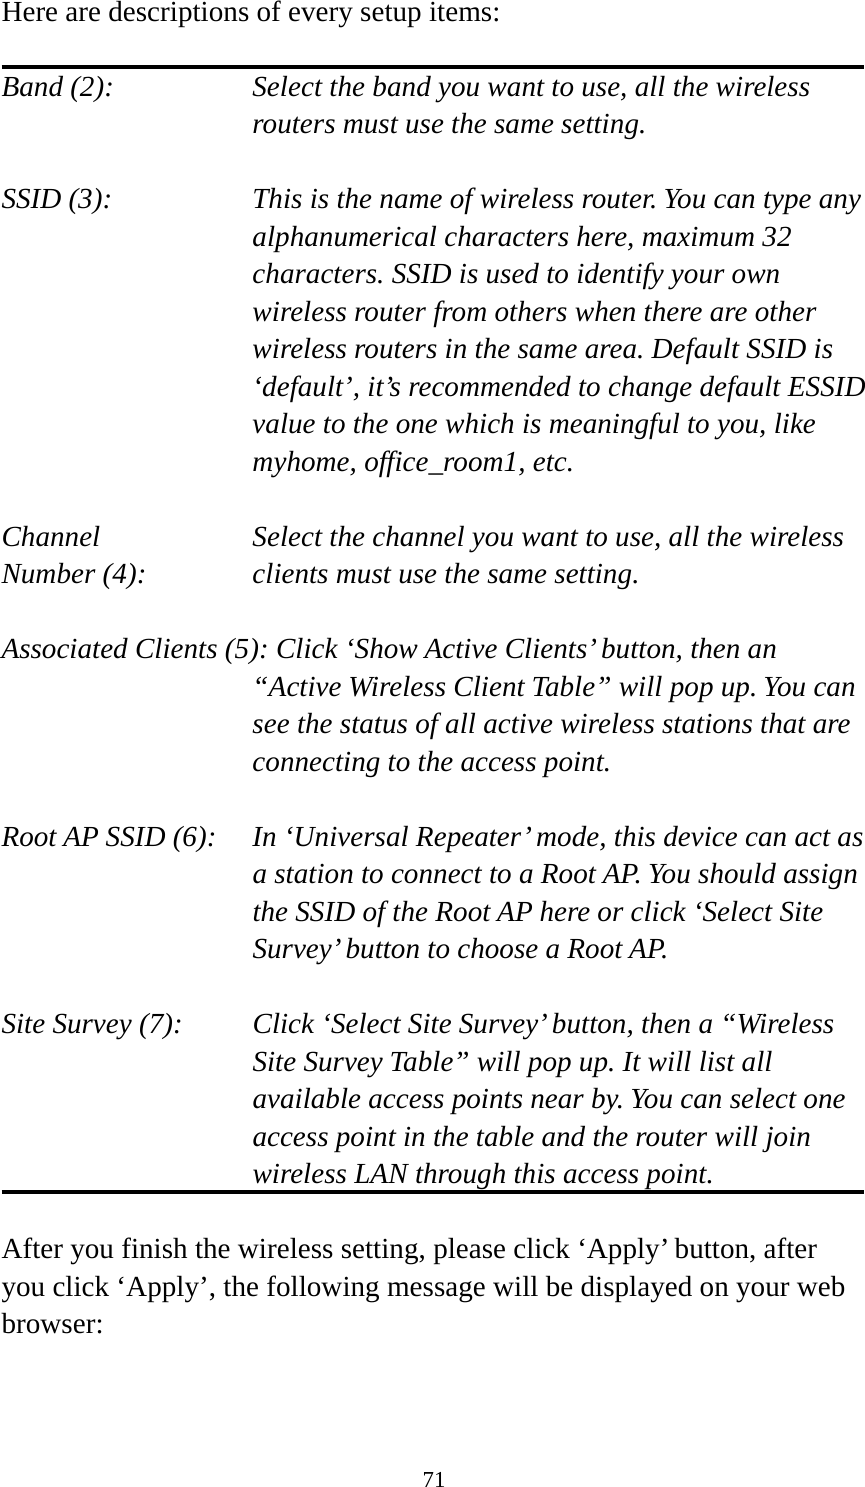 71 Here are descriptions of every setup items:  Band (2):  Select the band you want to use, all the wireless routers must use the same setting.  SSID (3):  This is the name of wireless router. You can type any alphanumerical characters here, maximum 32 characters. SSID is used to identify your own wireless router from others when there are other wireless routers in the same area. Default SSID is ‘default’, it’s recommended to change default ESSID value to the one which is meaningful to you, like myhome, office_room1, etc.  Channel  Select the channel you want to use, all the wireless Number (4):  clients must use the same setting.  Associated Clients (5): Click ‘Show Active Clients’ button, then an “Active Wireless Client Table” will pop up. You can see the status of all active wireless stations that are connecting to the access point.  Root AP SSID (6):  In ‘Universal Repeater’ mode, this device can act as a station to connect to a Root AP. You should assign the SSID of the Root AP here or click ‘Select Site Survey’ button to choose a Root AP.  Site Survey (7):  Click ‘Select Site Survey’ button, then a “Wireless Site Survey Table” will pop up. It will list all available access points near by. You can select one access point in the table and the router will join wireless LAN through this access point.  After you finish the wireless setting, please click ‘Apply’ button, after you click ‘Apply’, the following message will be displayed on your web browser:  